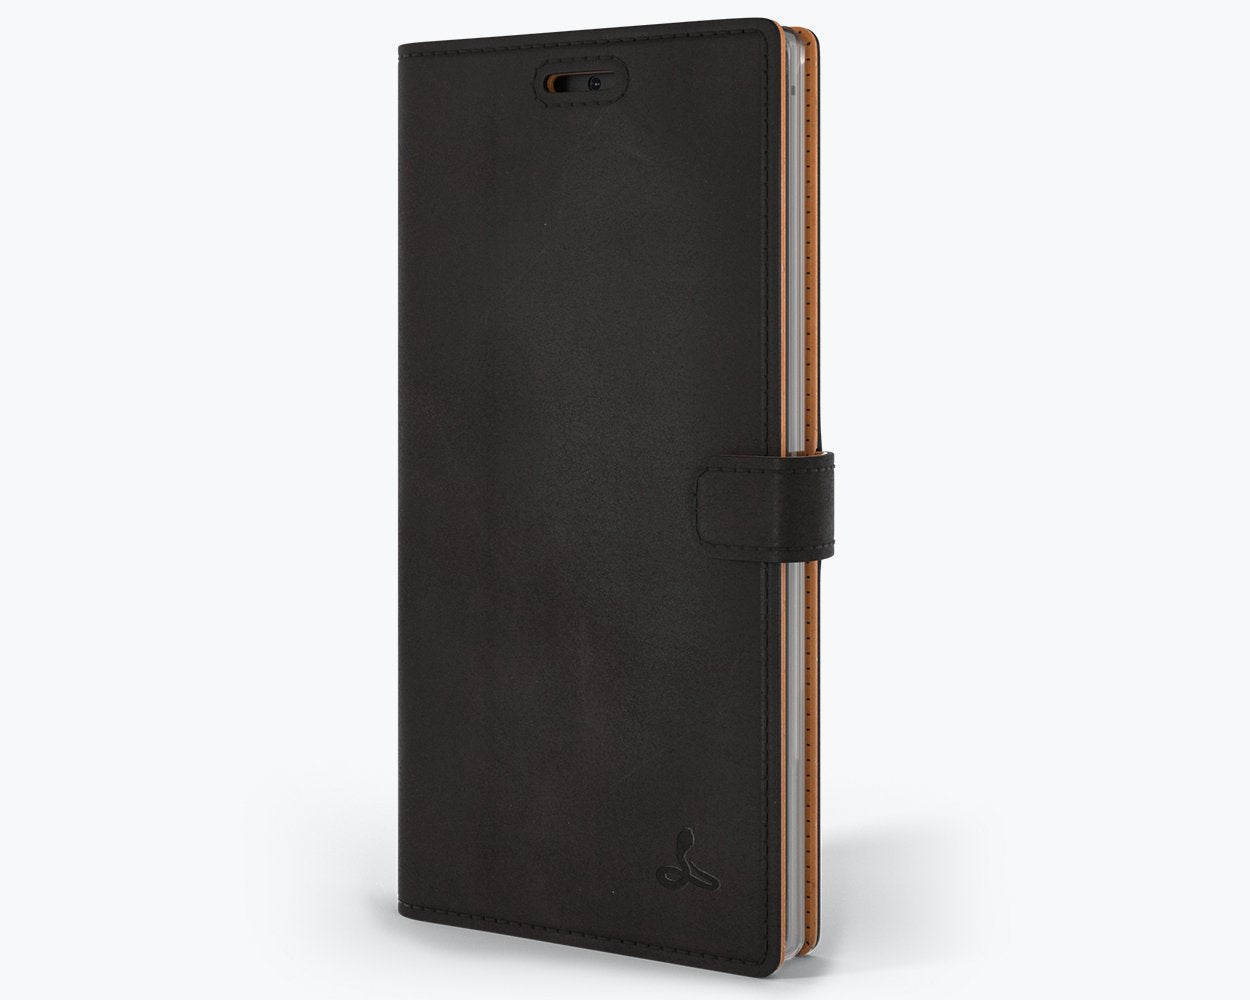 Vintage Leather Wallet - Samsung Galaxy Note 10 Plus